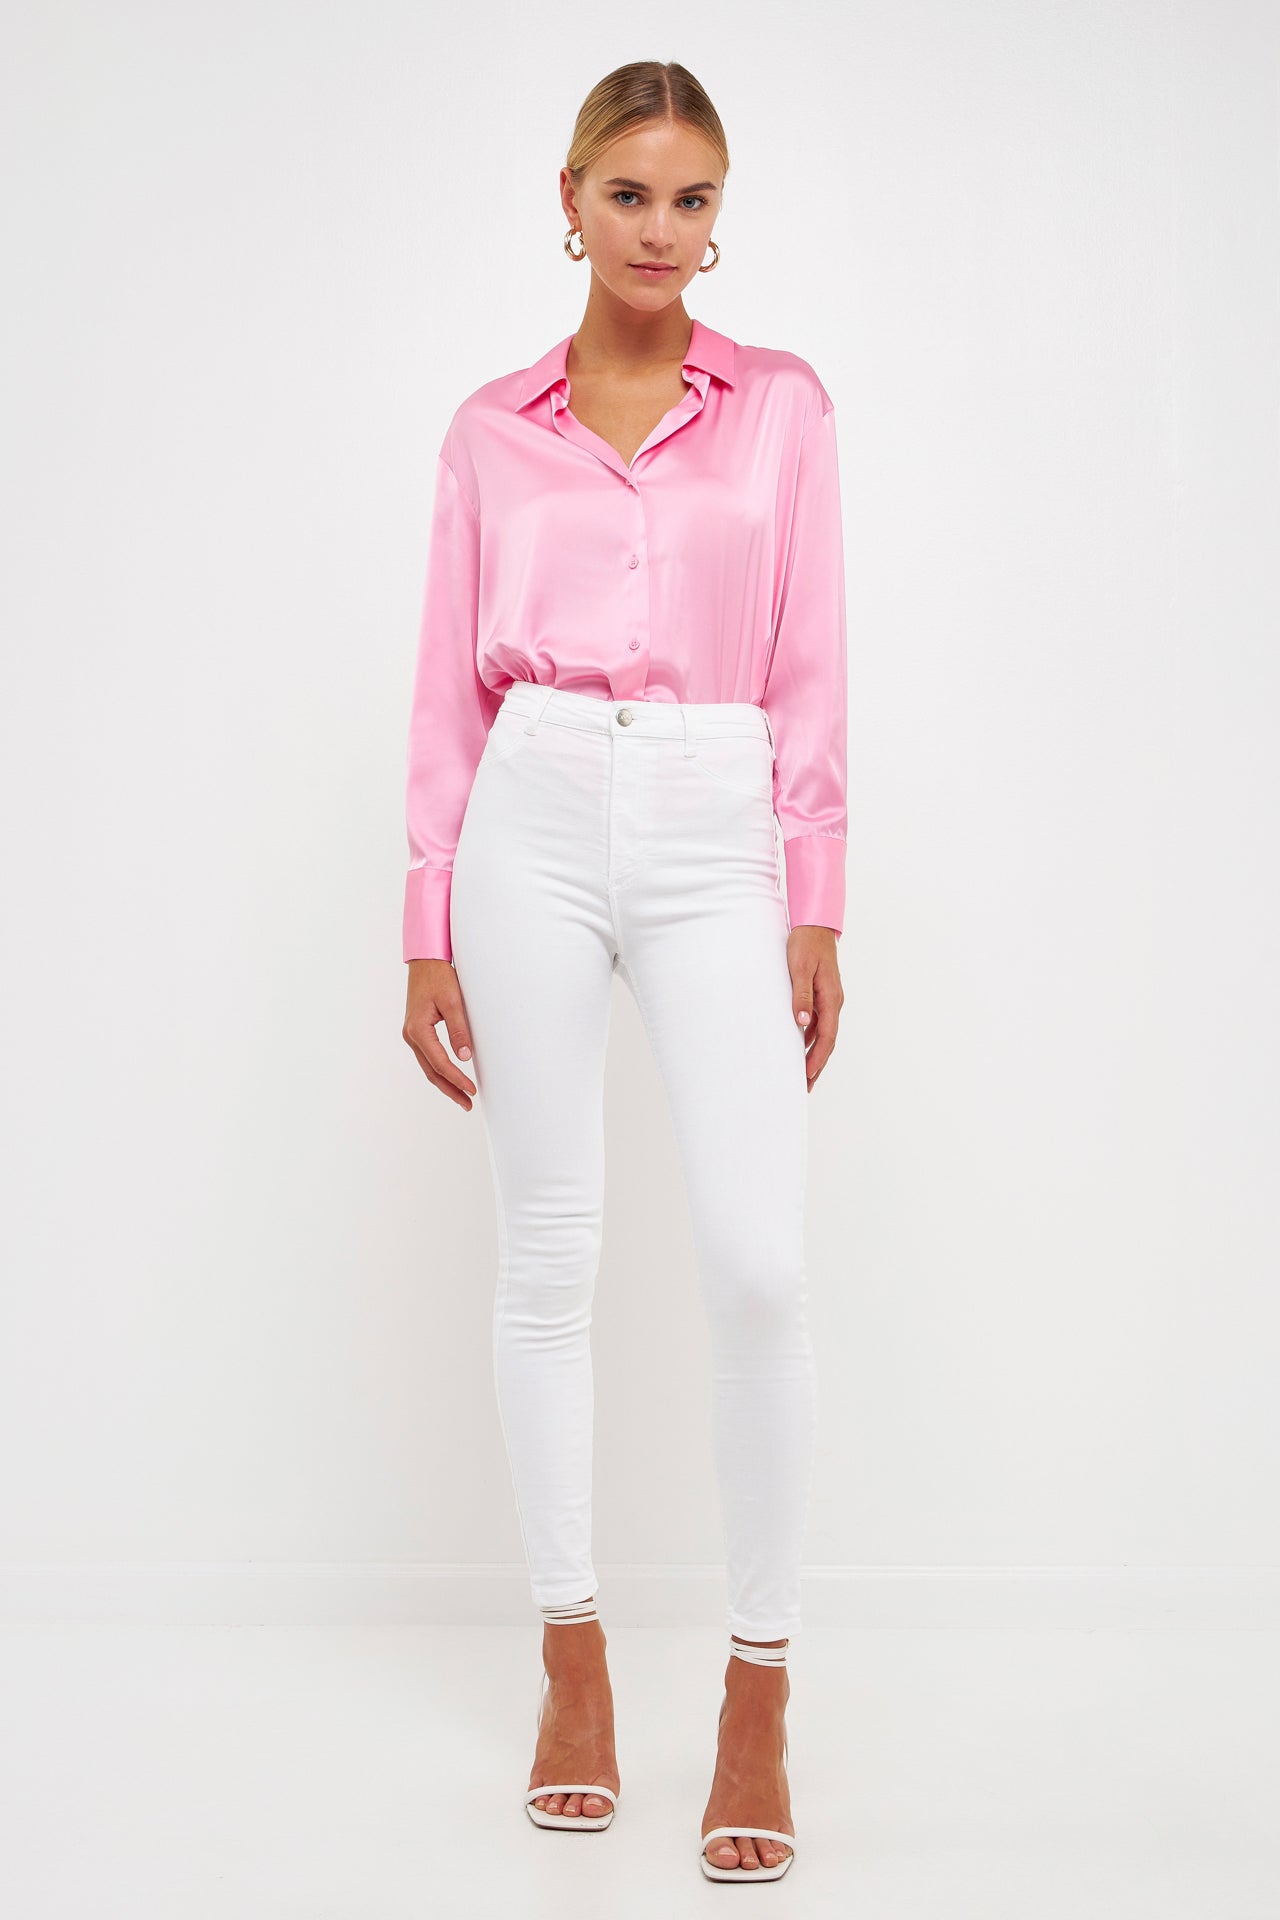 ENDLESS ROSE - Silky Button up Top - SHIRTS & BLOUSES available at Objectrare